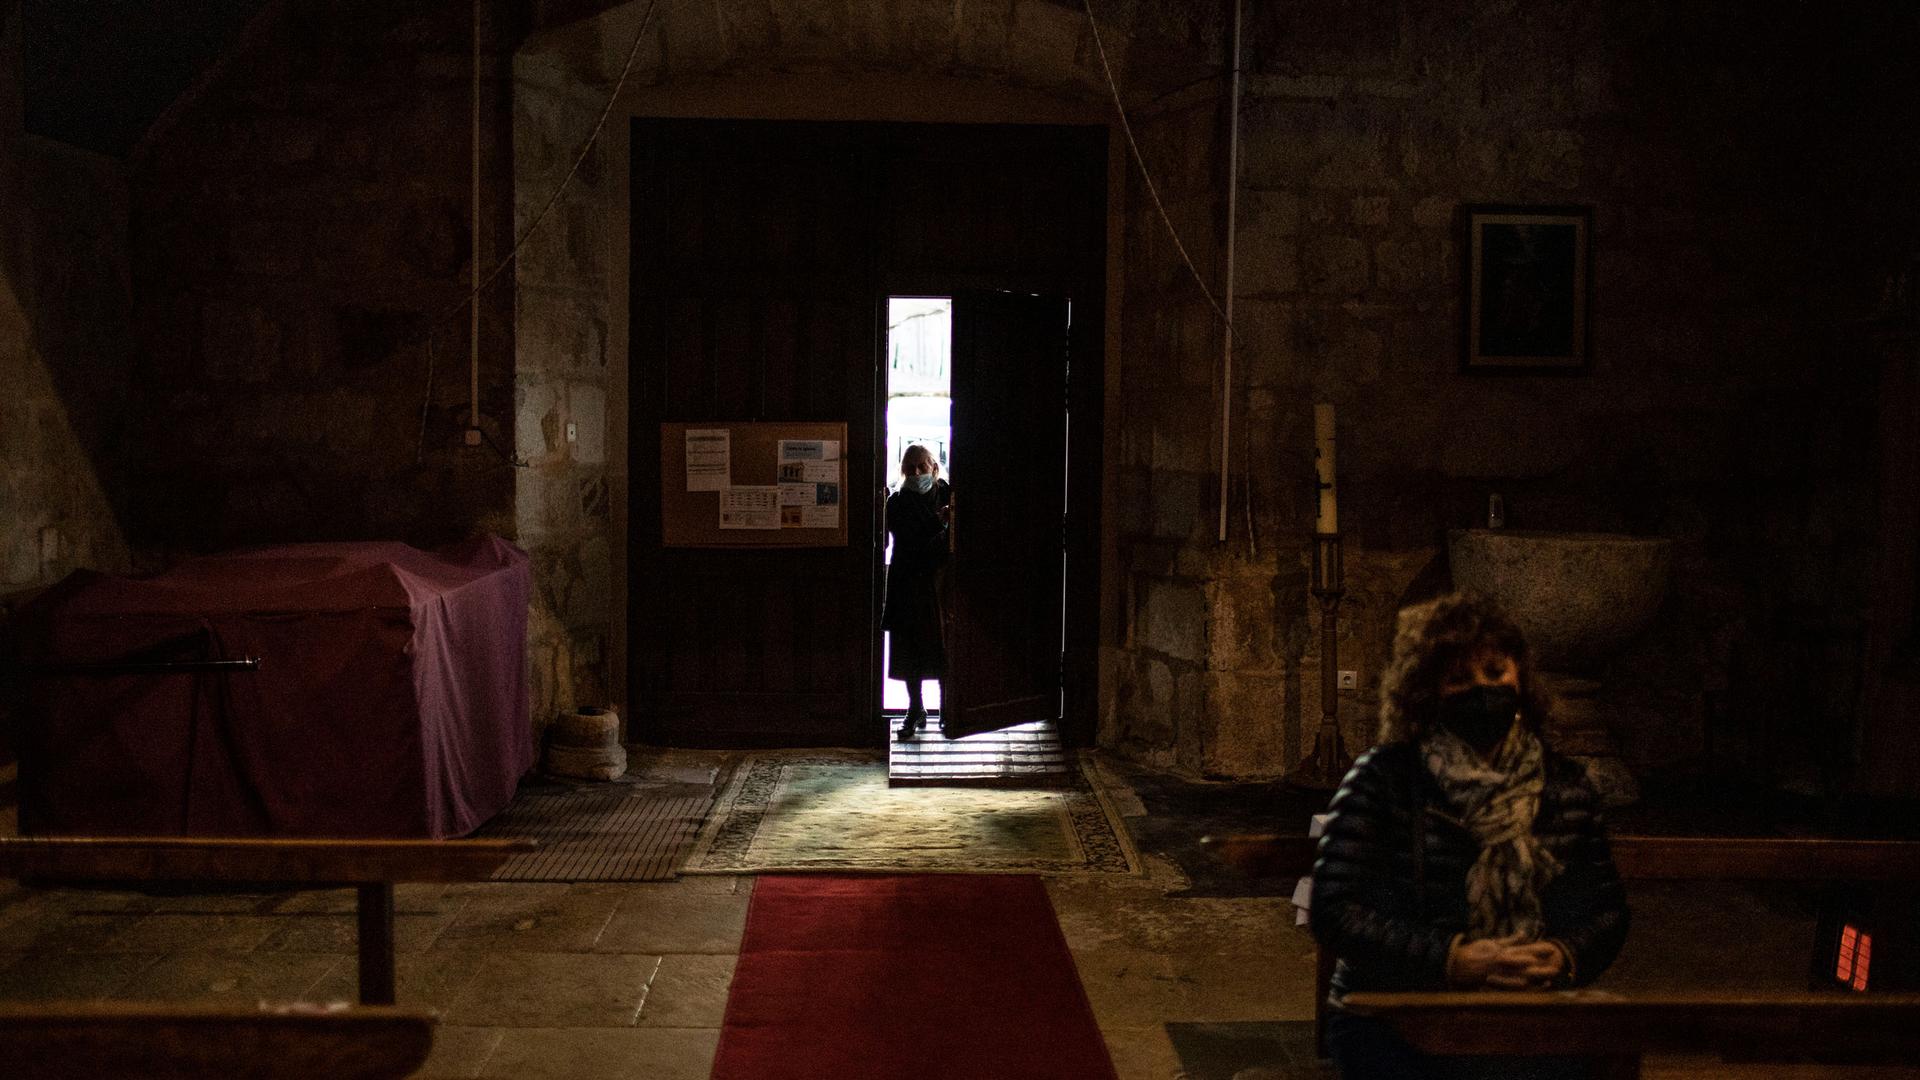 A parishioner enters into the Catholic church of Cazurra, a village of around 75 inhabitants, in the Zamora province of Spain, Saturday, Nov. 27, 2021.